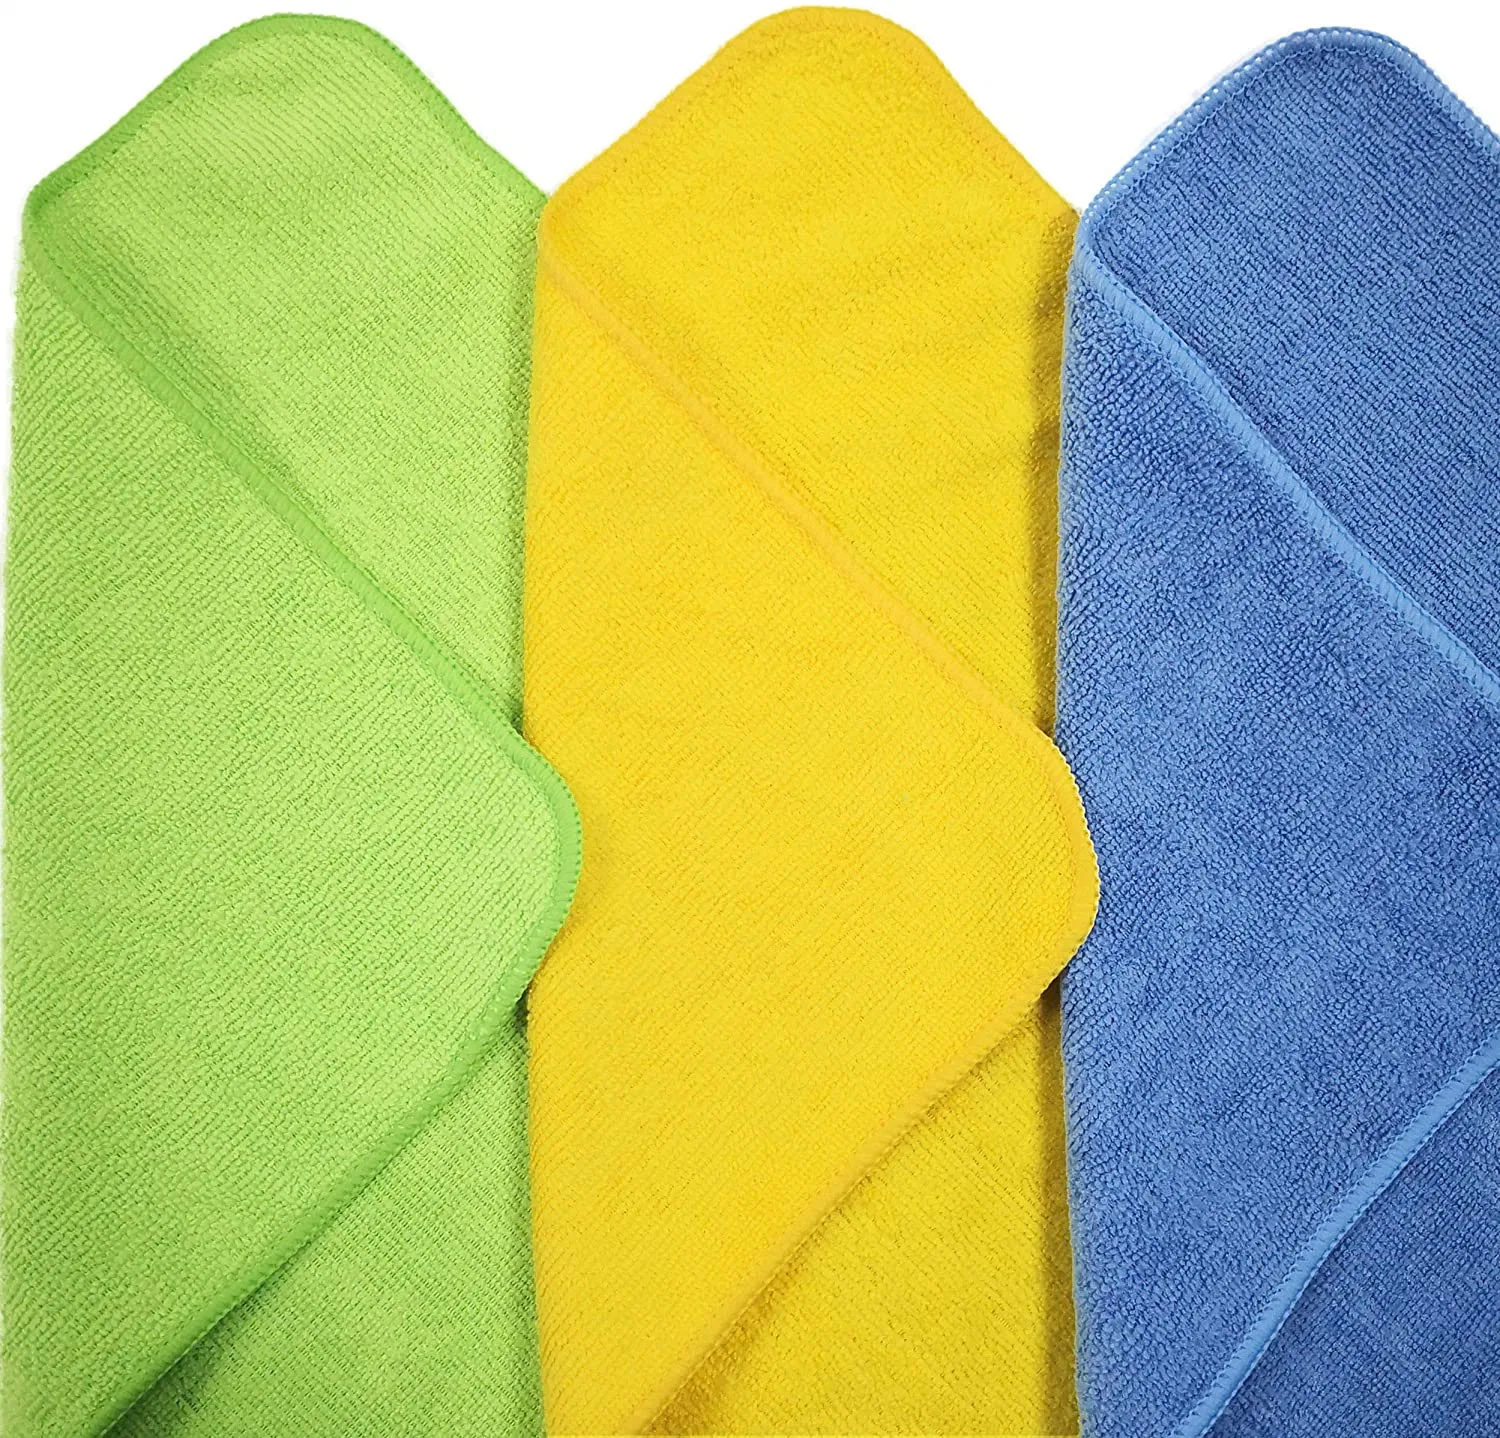 80% Polyester 20% Polyester Cleaning Cloth Polishing Car Microfiber Cloth Car Kitchen Towels Micro Fibre Towel Microfiber Cleaning Cloth